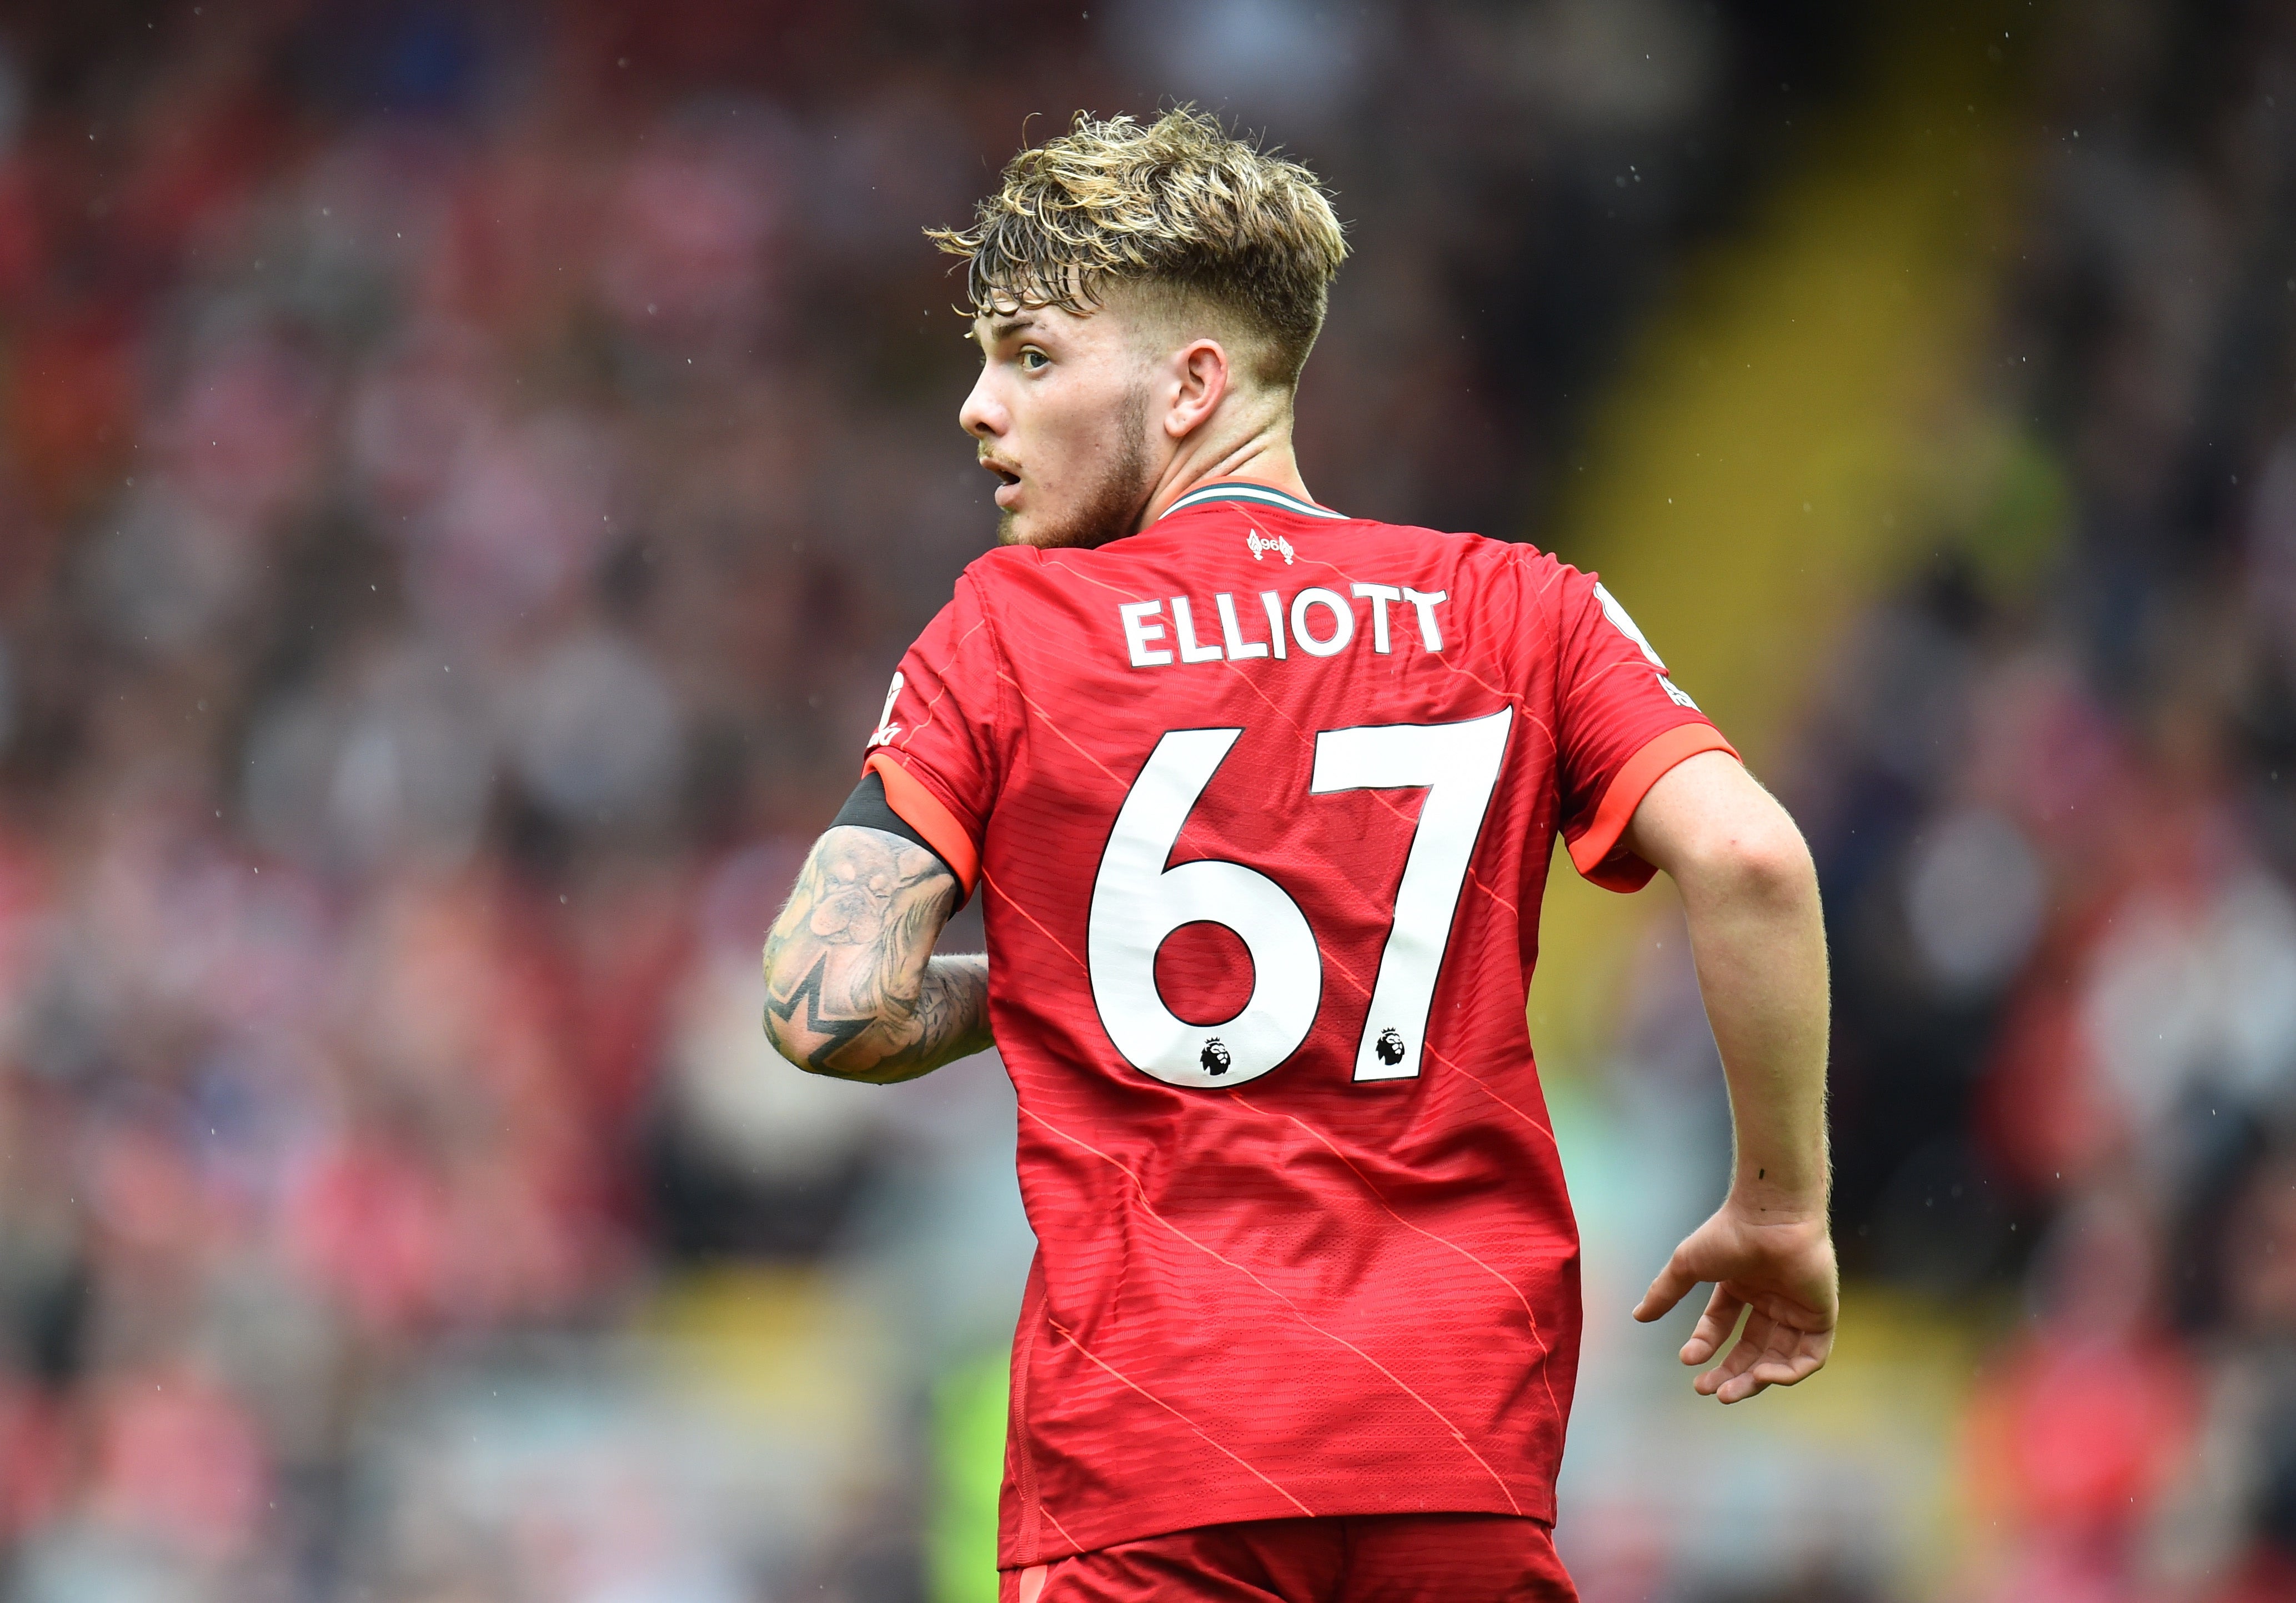 <p>Burnley identified Elliott as a weak link and in return he topped the progressive passes, progressive carries and pressures against them</p>